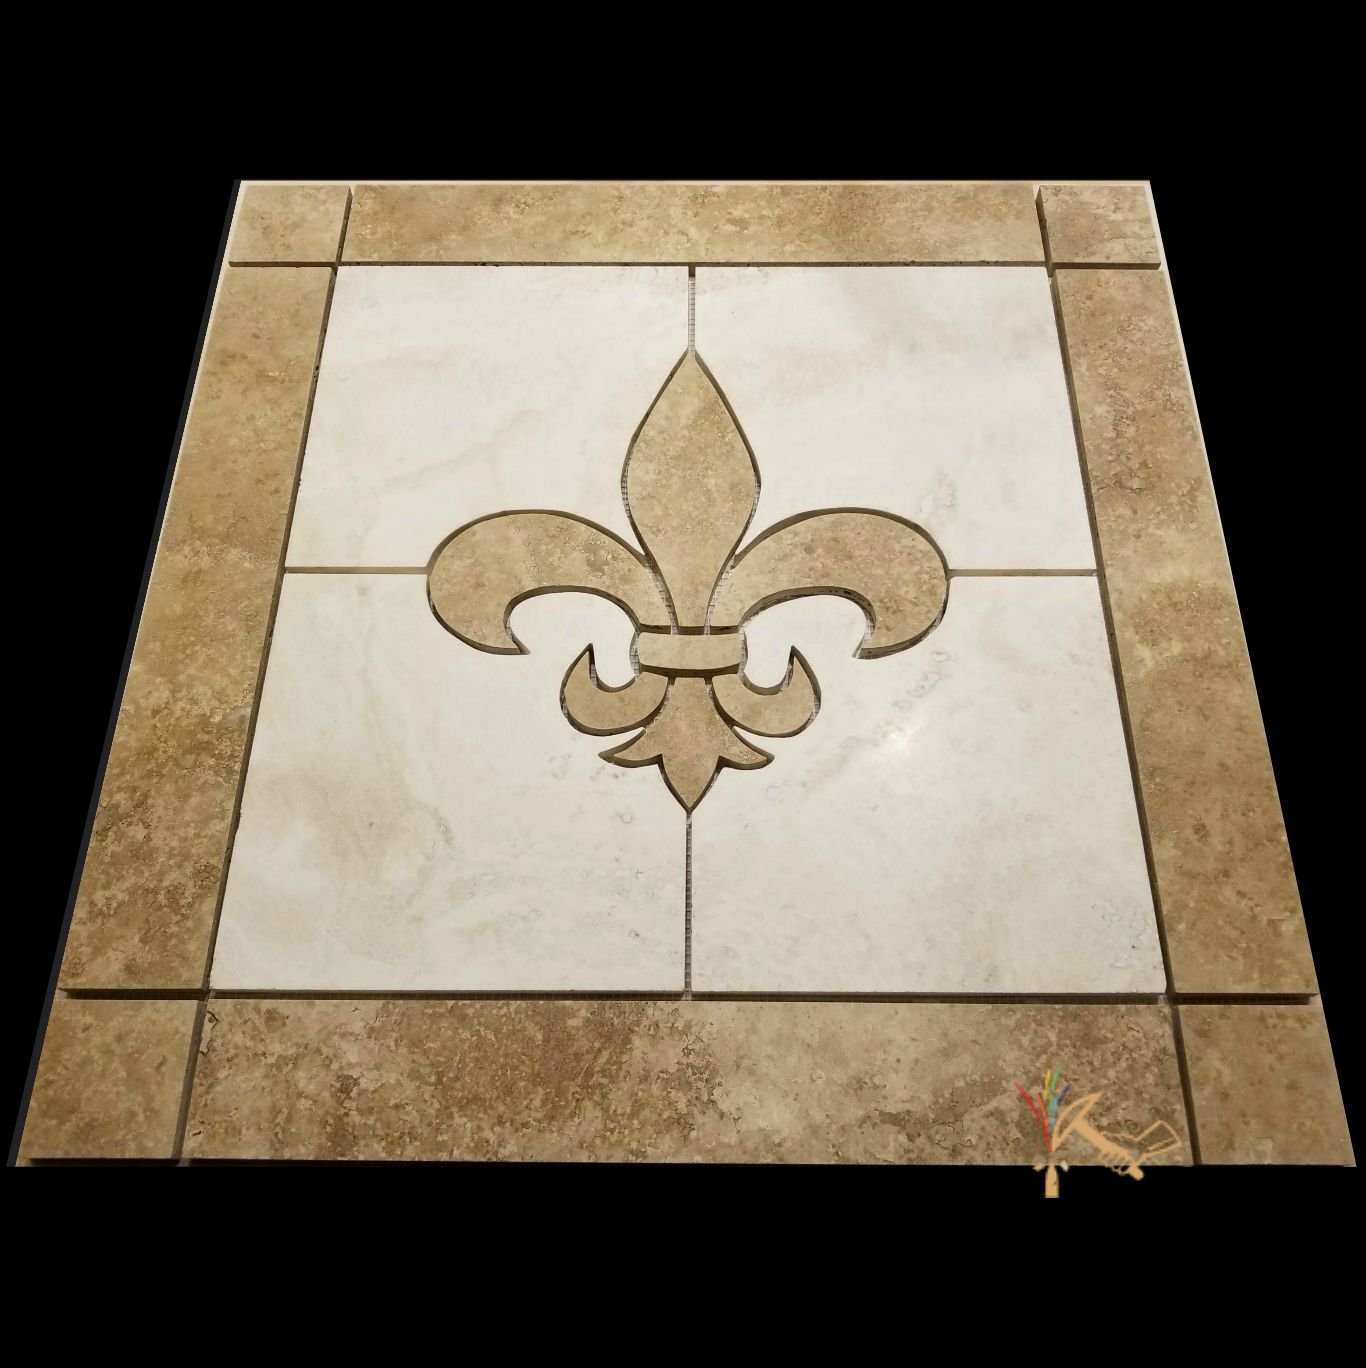 Fleur de Lis Medallion made from travertine tile which may be installed as a floor medallion or backsplash centerpiece.